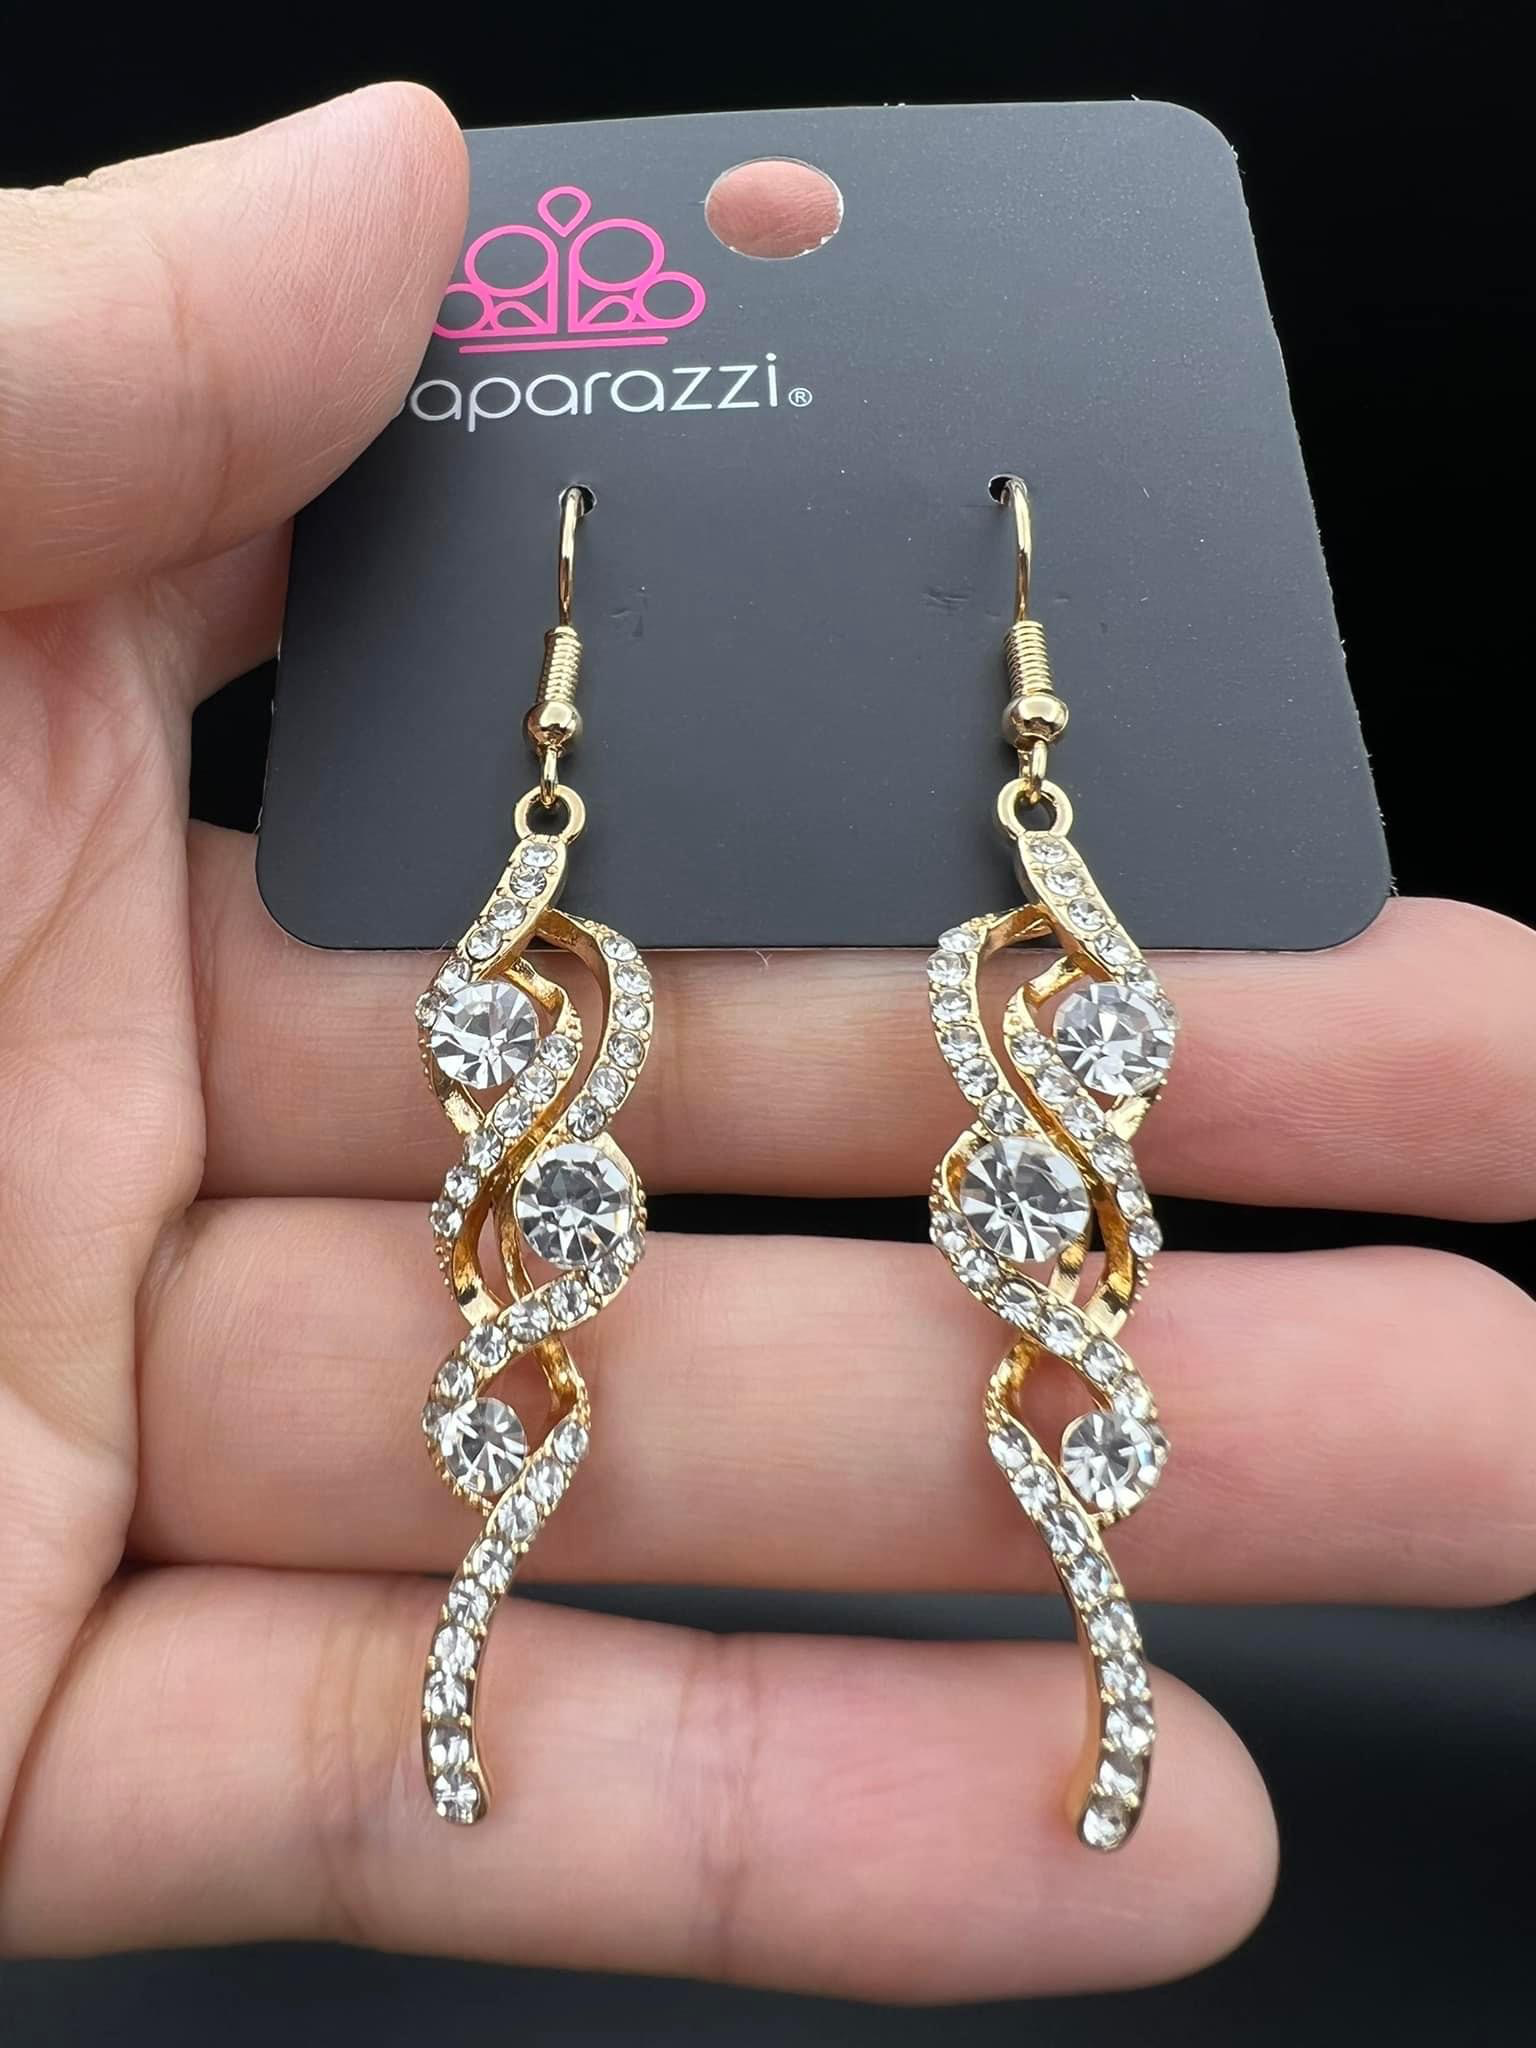 Paparazzi - Highly Flammable - Gold Earrings – Pretty Precious Metals